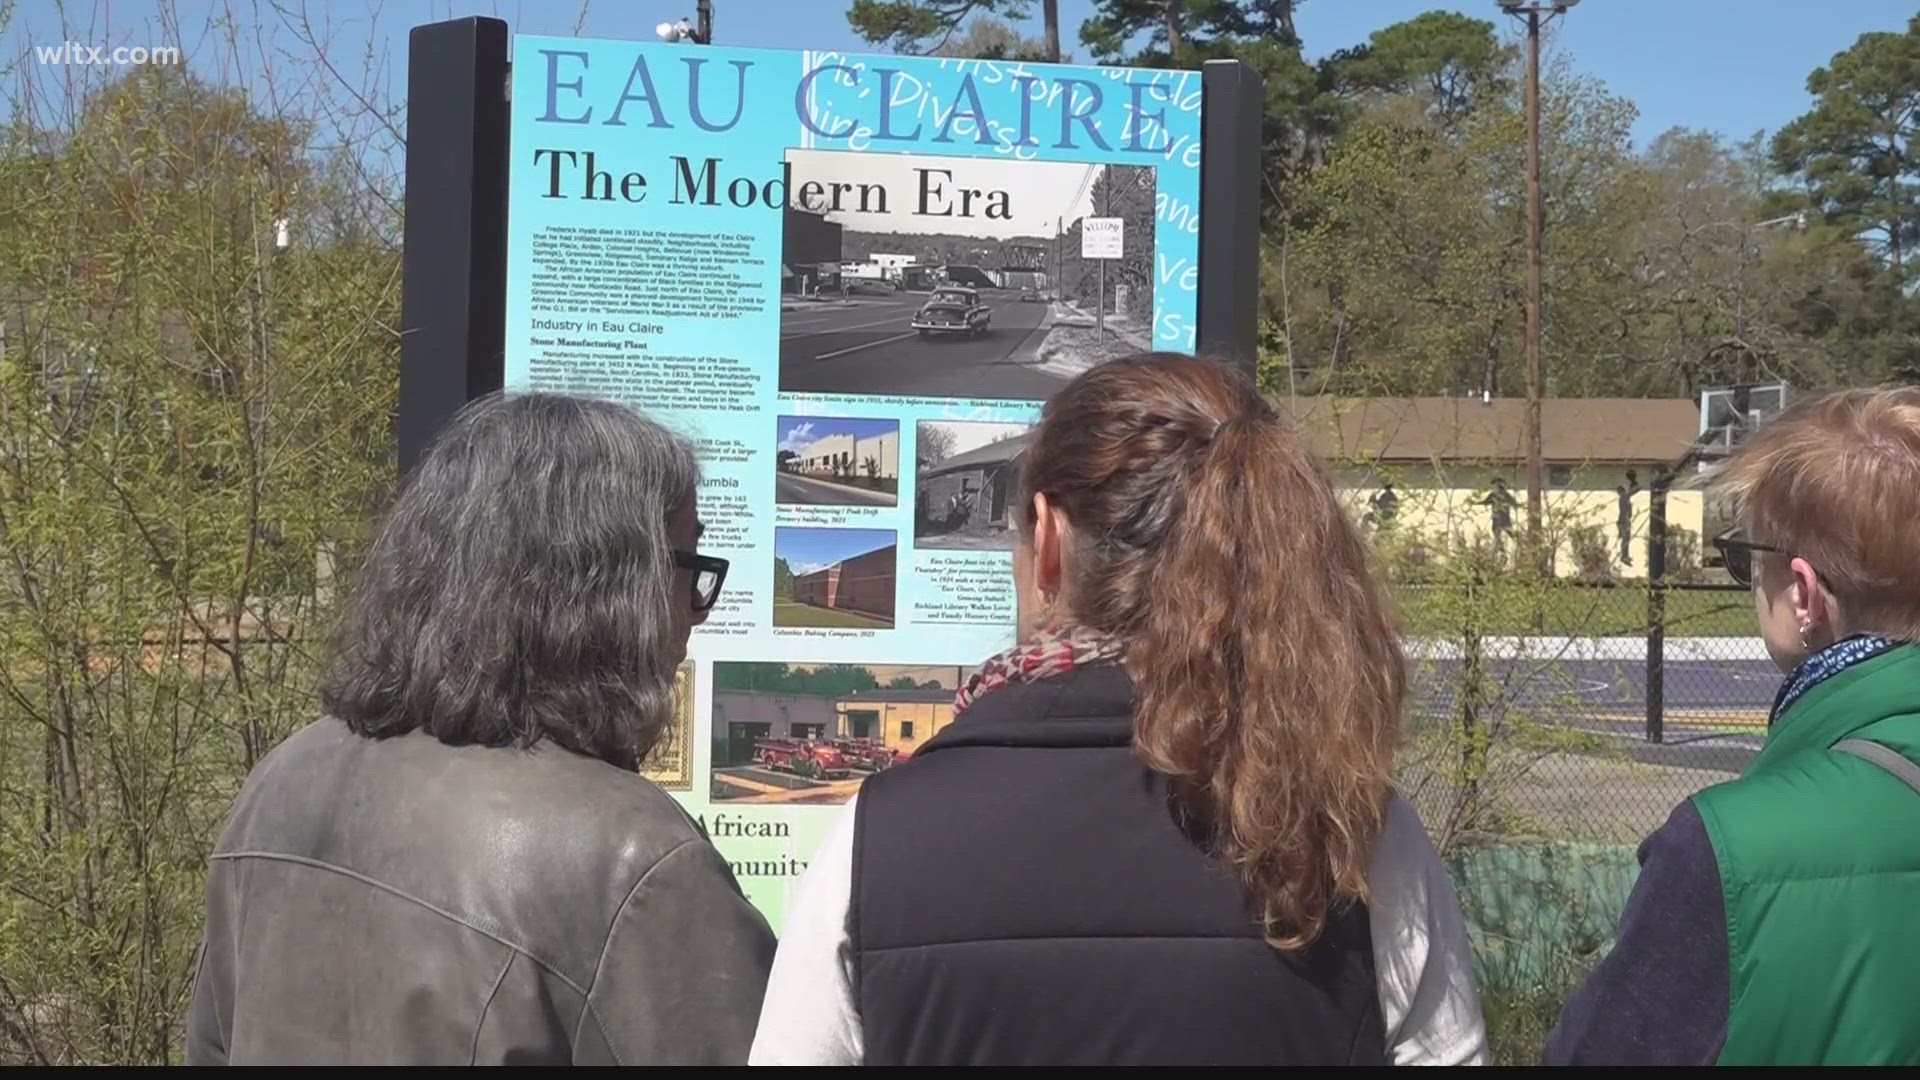 The city of Columbia unveiled a kiosk at Hyatt Park.